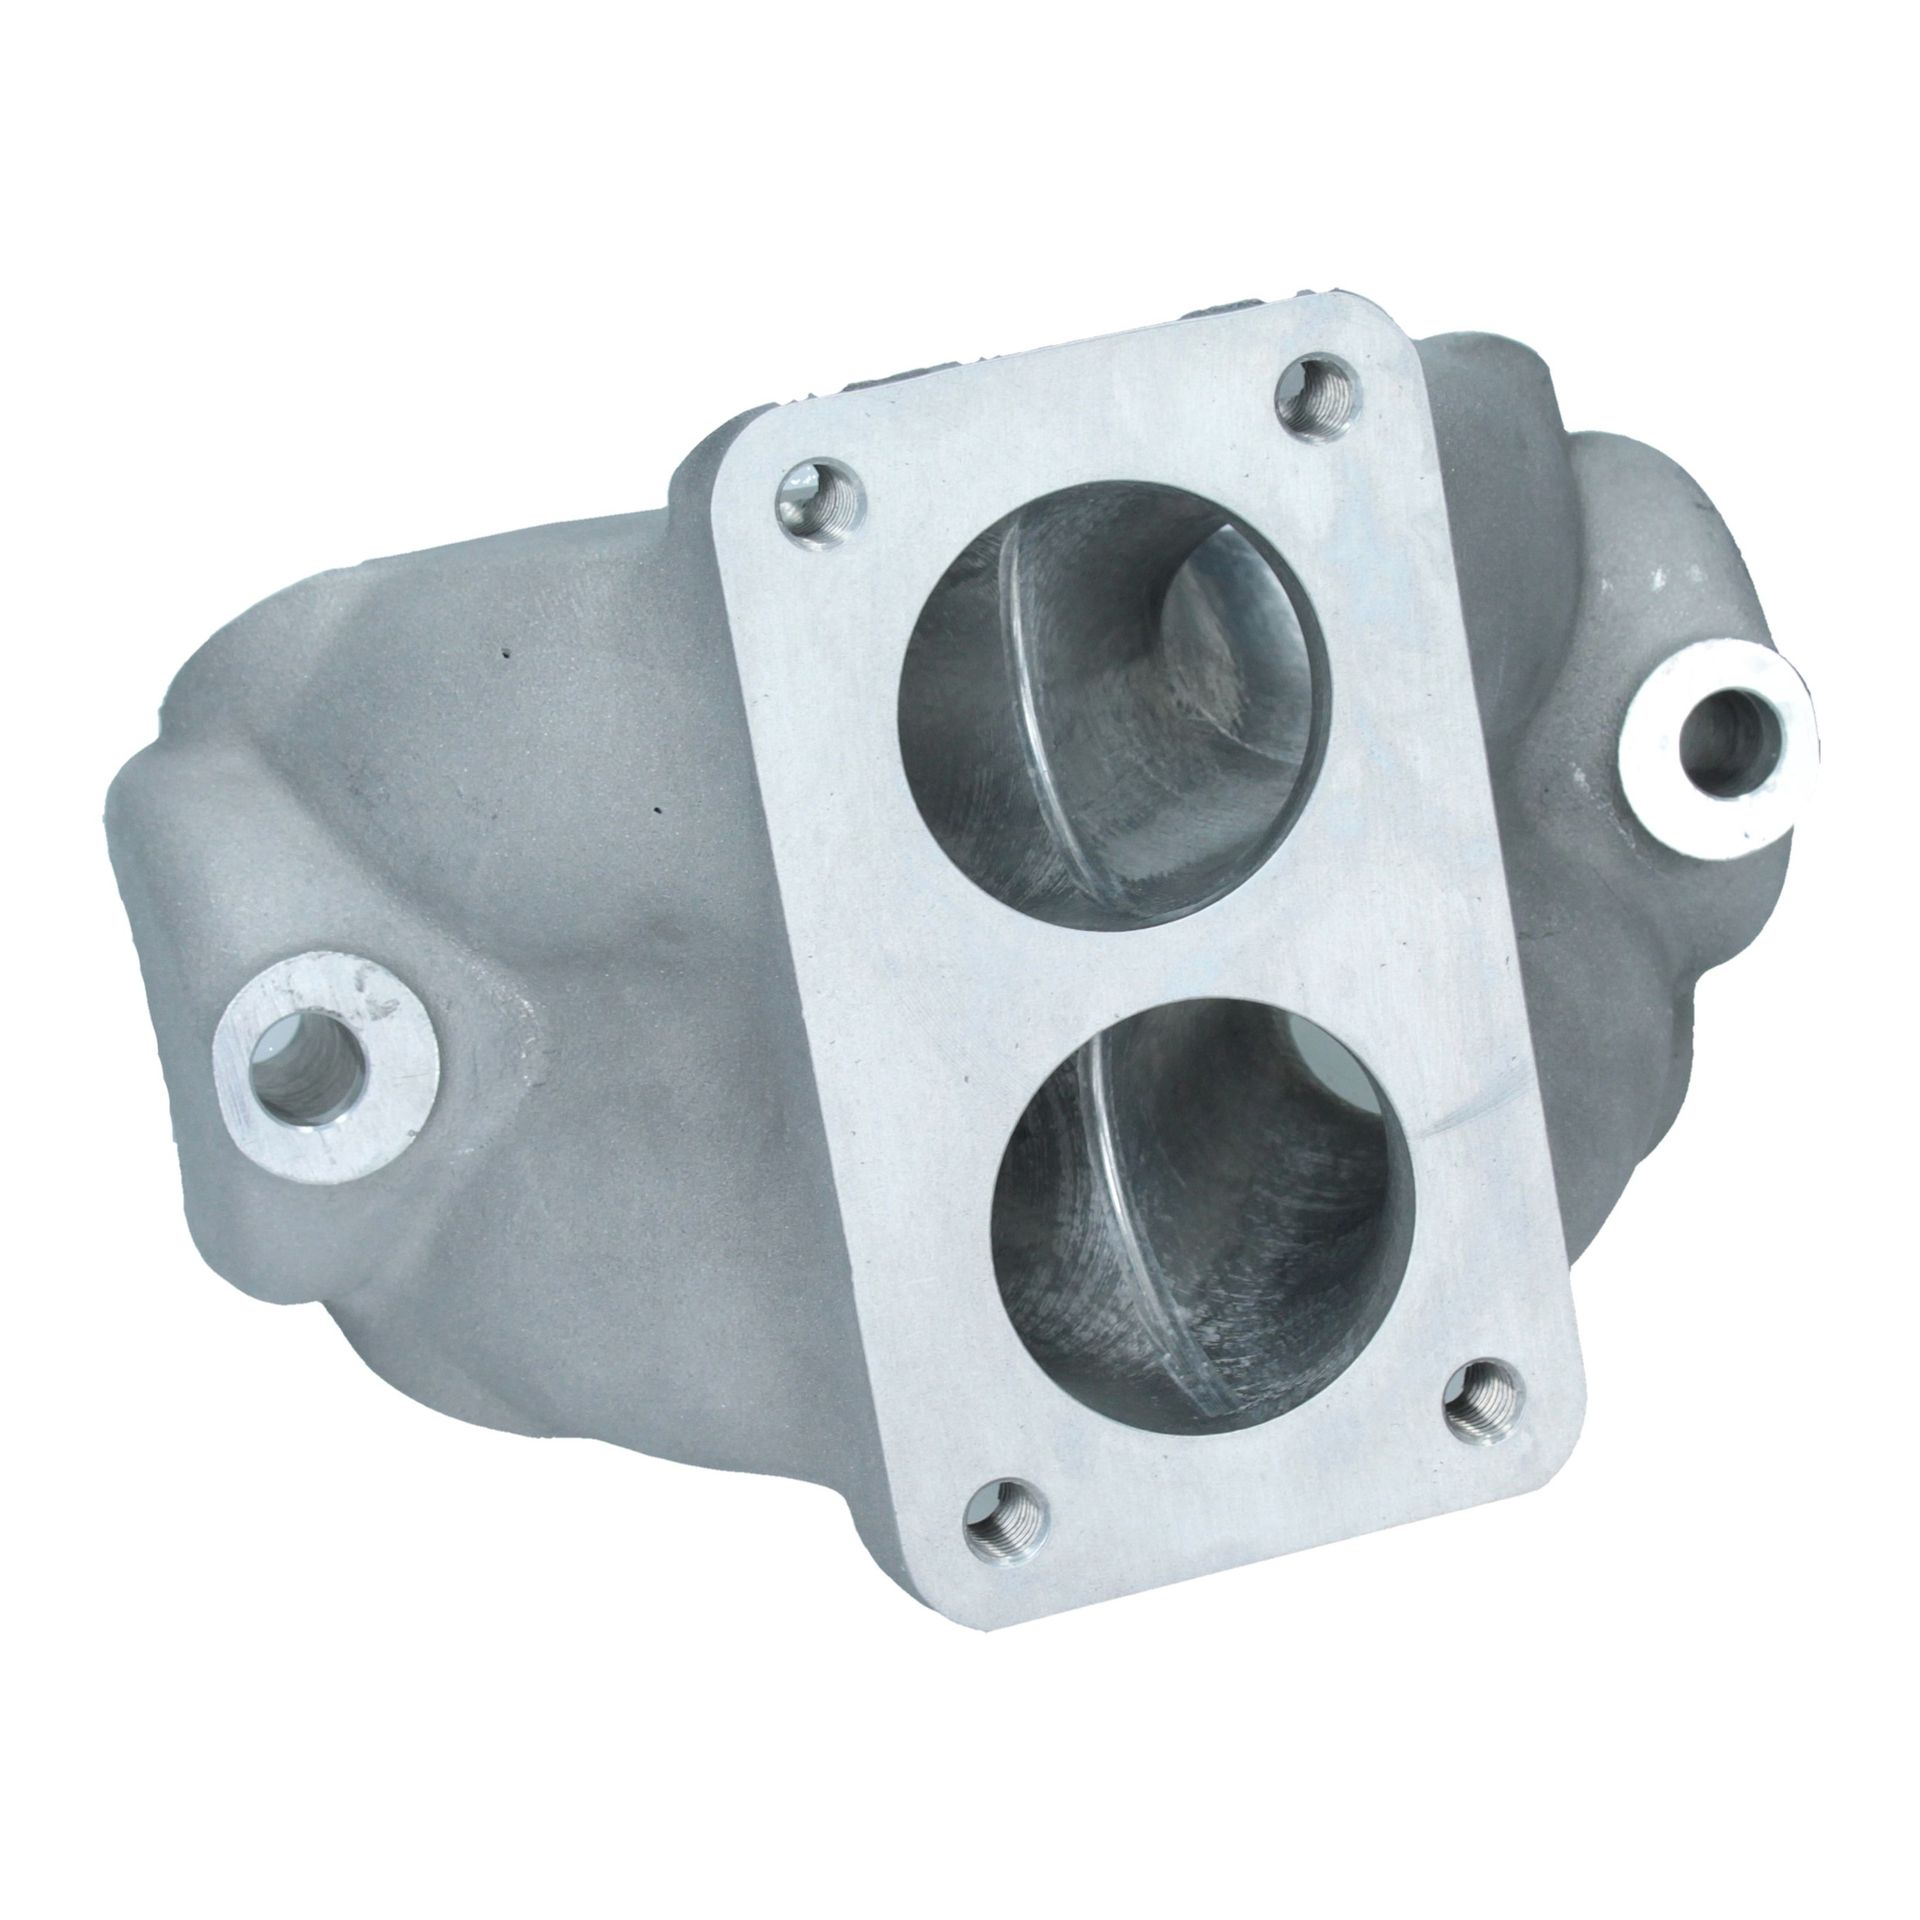 INLET MANIFOLD - 250 COMP - MACHINED PORT